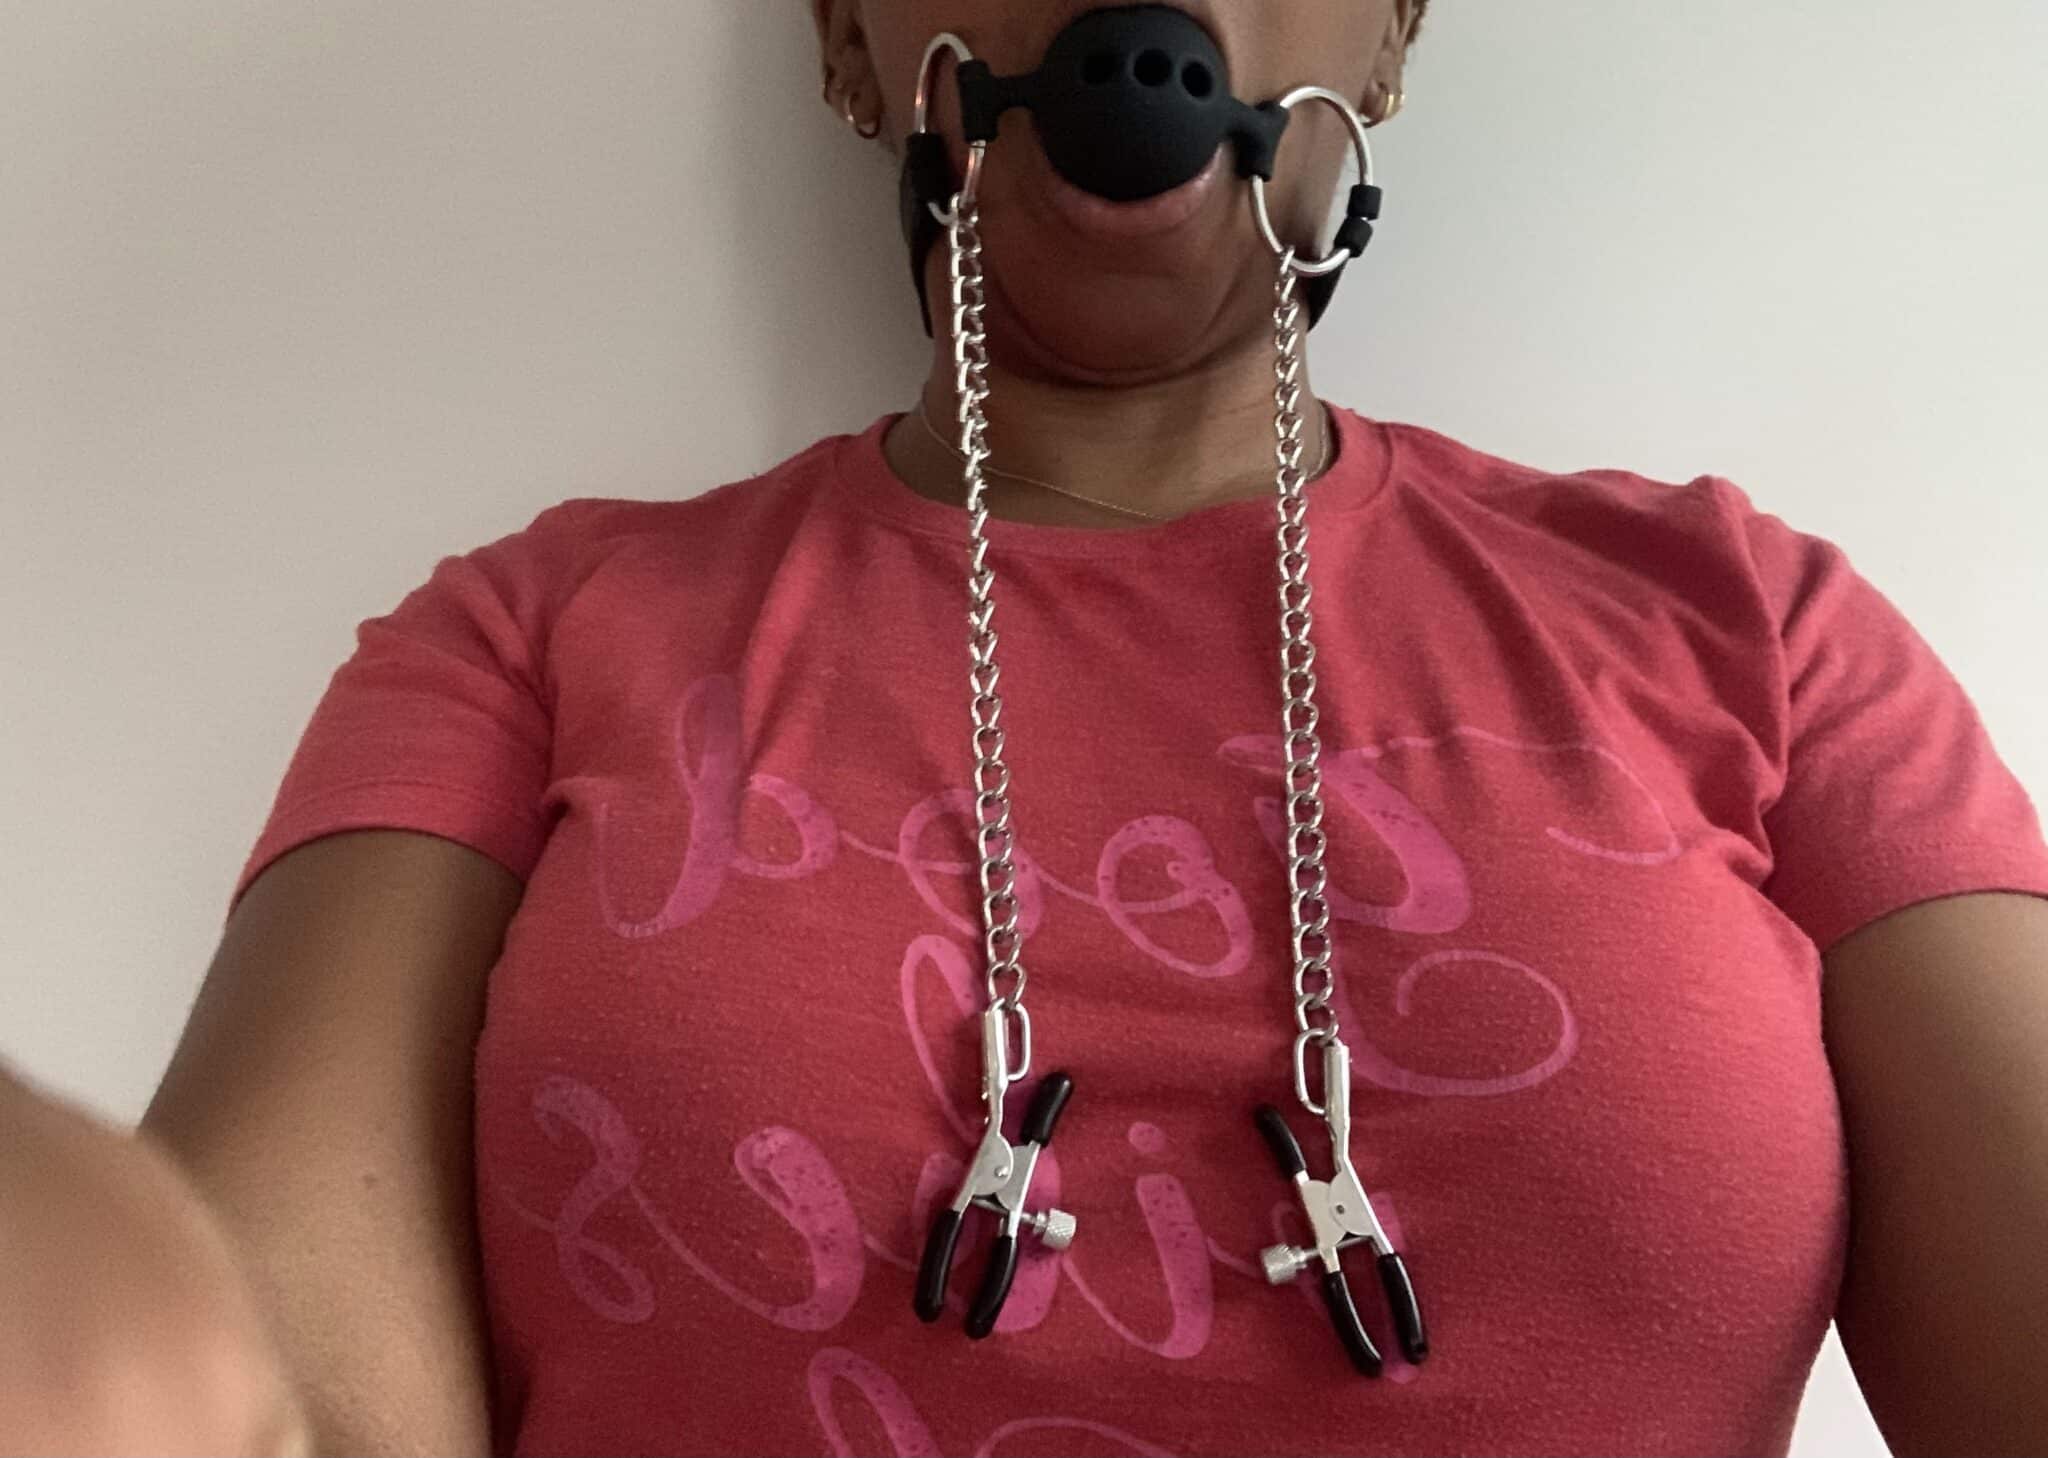 DOMINIX Deluxe Large Gag with Nipple Clamps. Slide 4